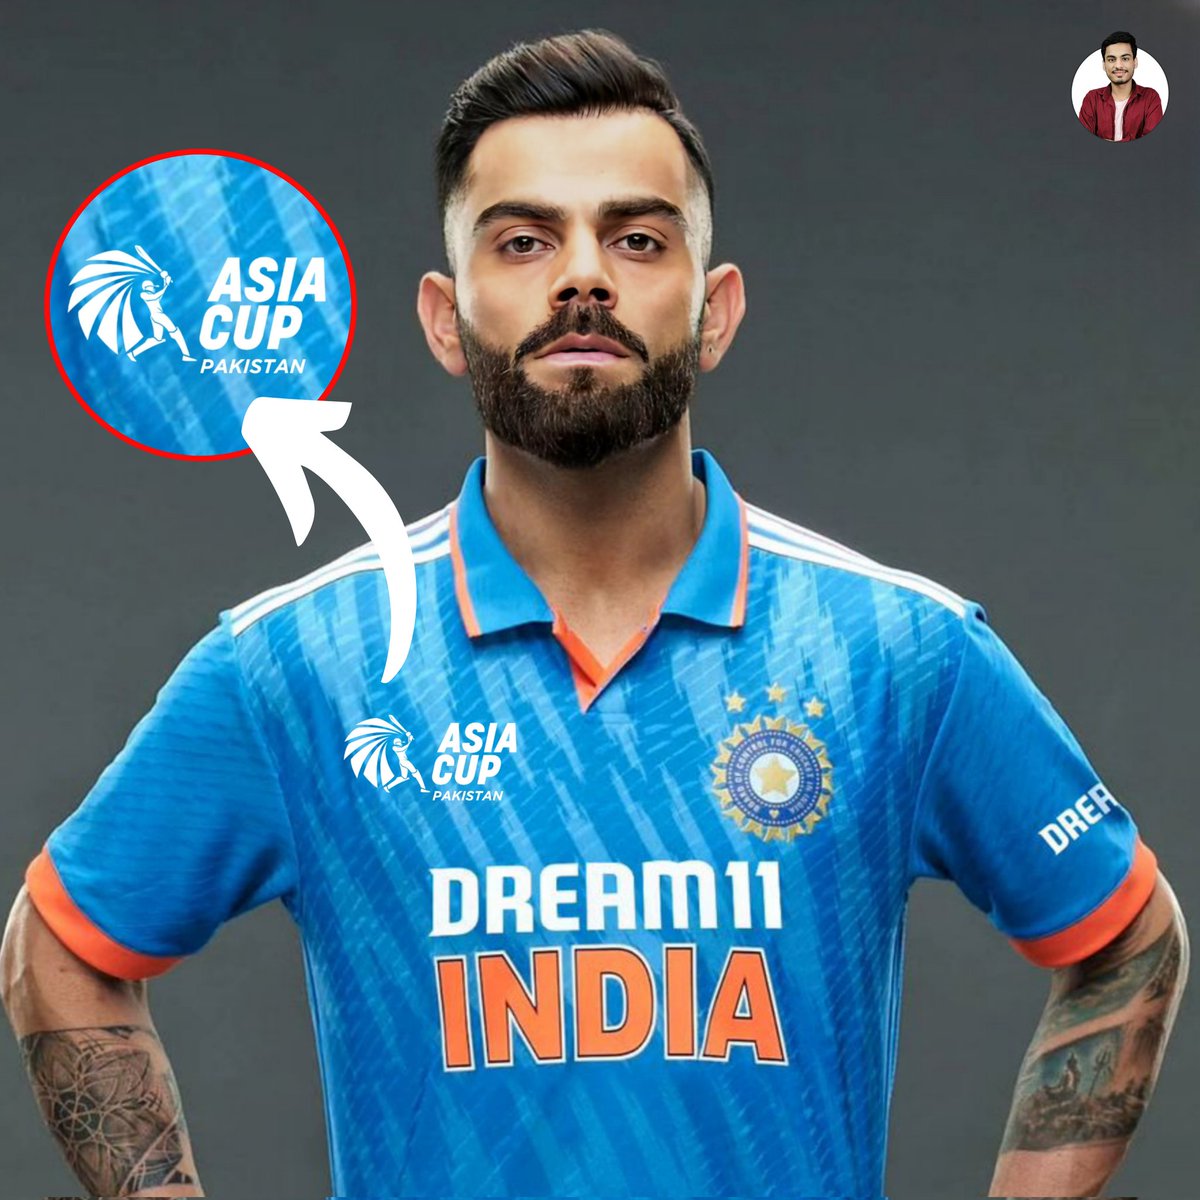 Team india Jersey with #Pakistan host Asiacup logo.. 
Asia Cup starting from #august30